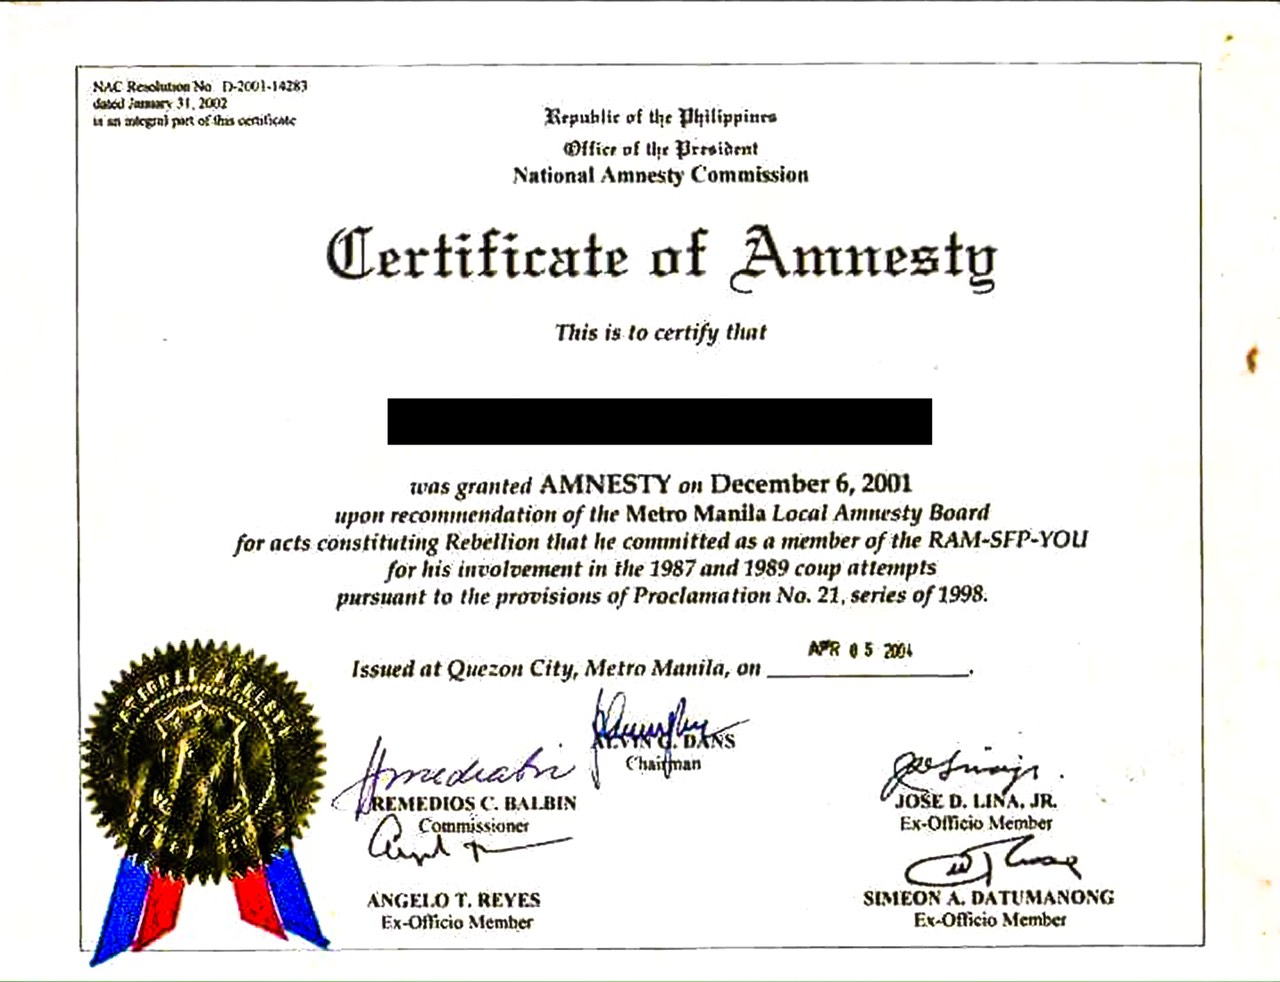 CERTIFICATE. Senator Trillanes presents a copy of a soldier's certificate of amnesty to show other presidents do not sign such documents. Photo from Trillanes' office  